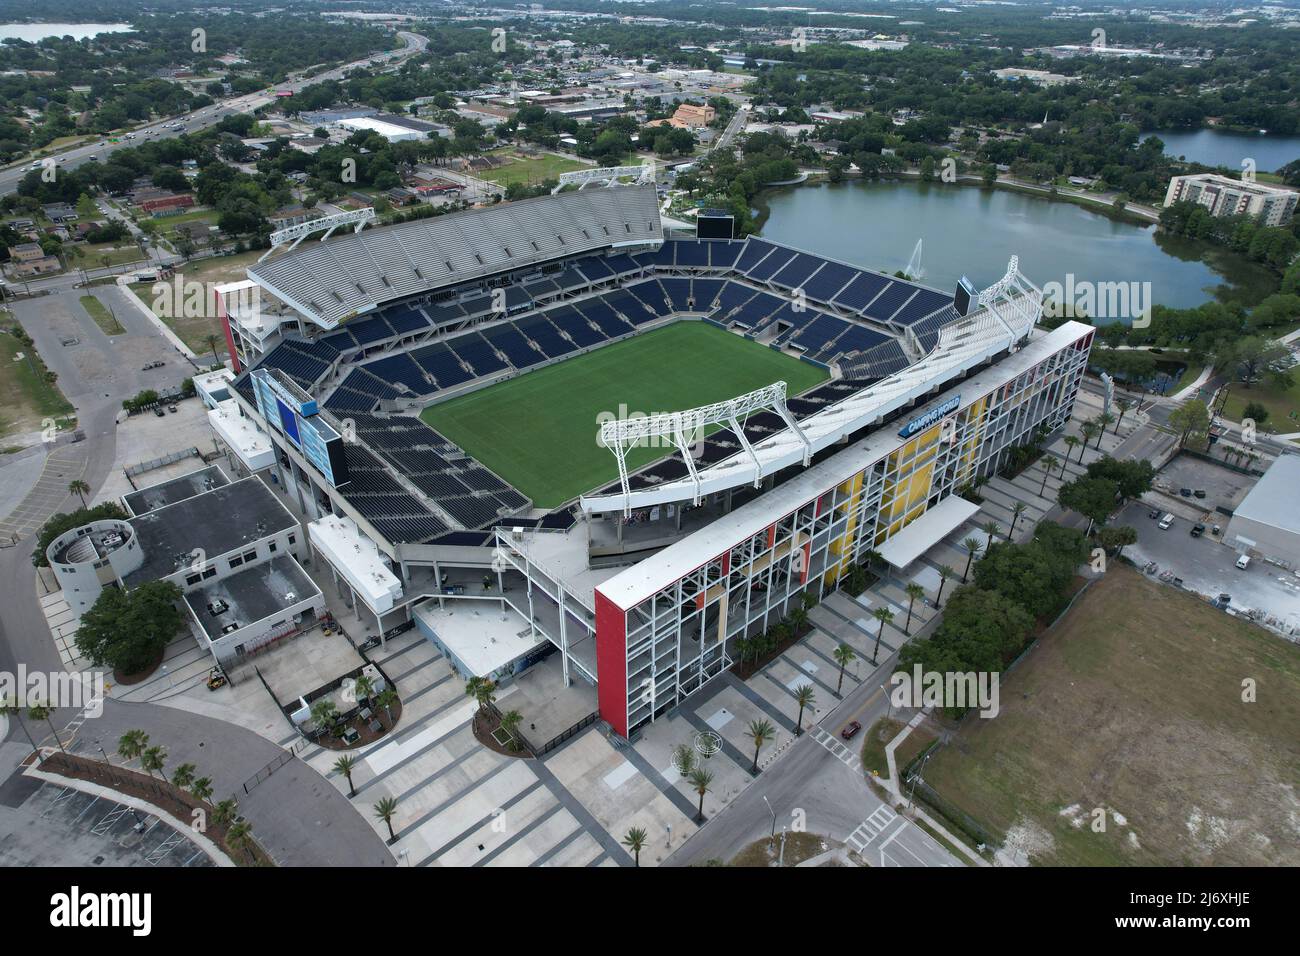 An aerial view of Camping World Stadium, formerly known as Orlando